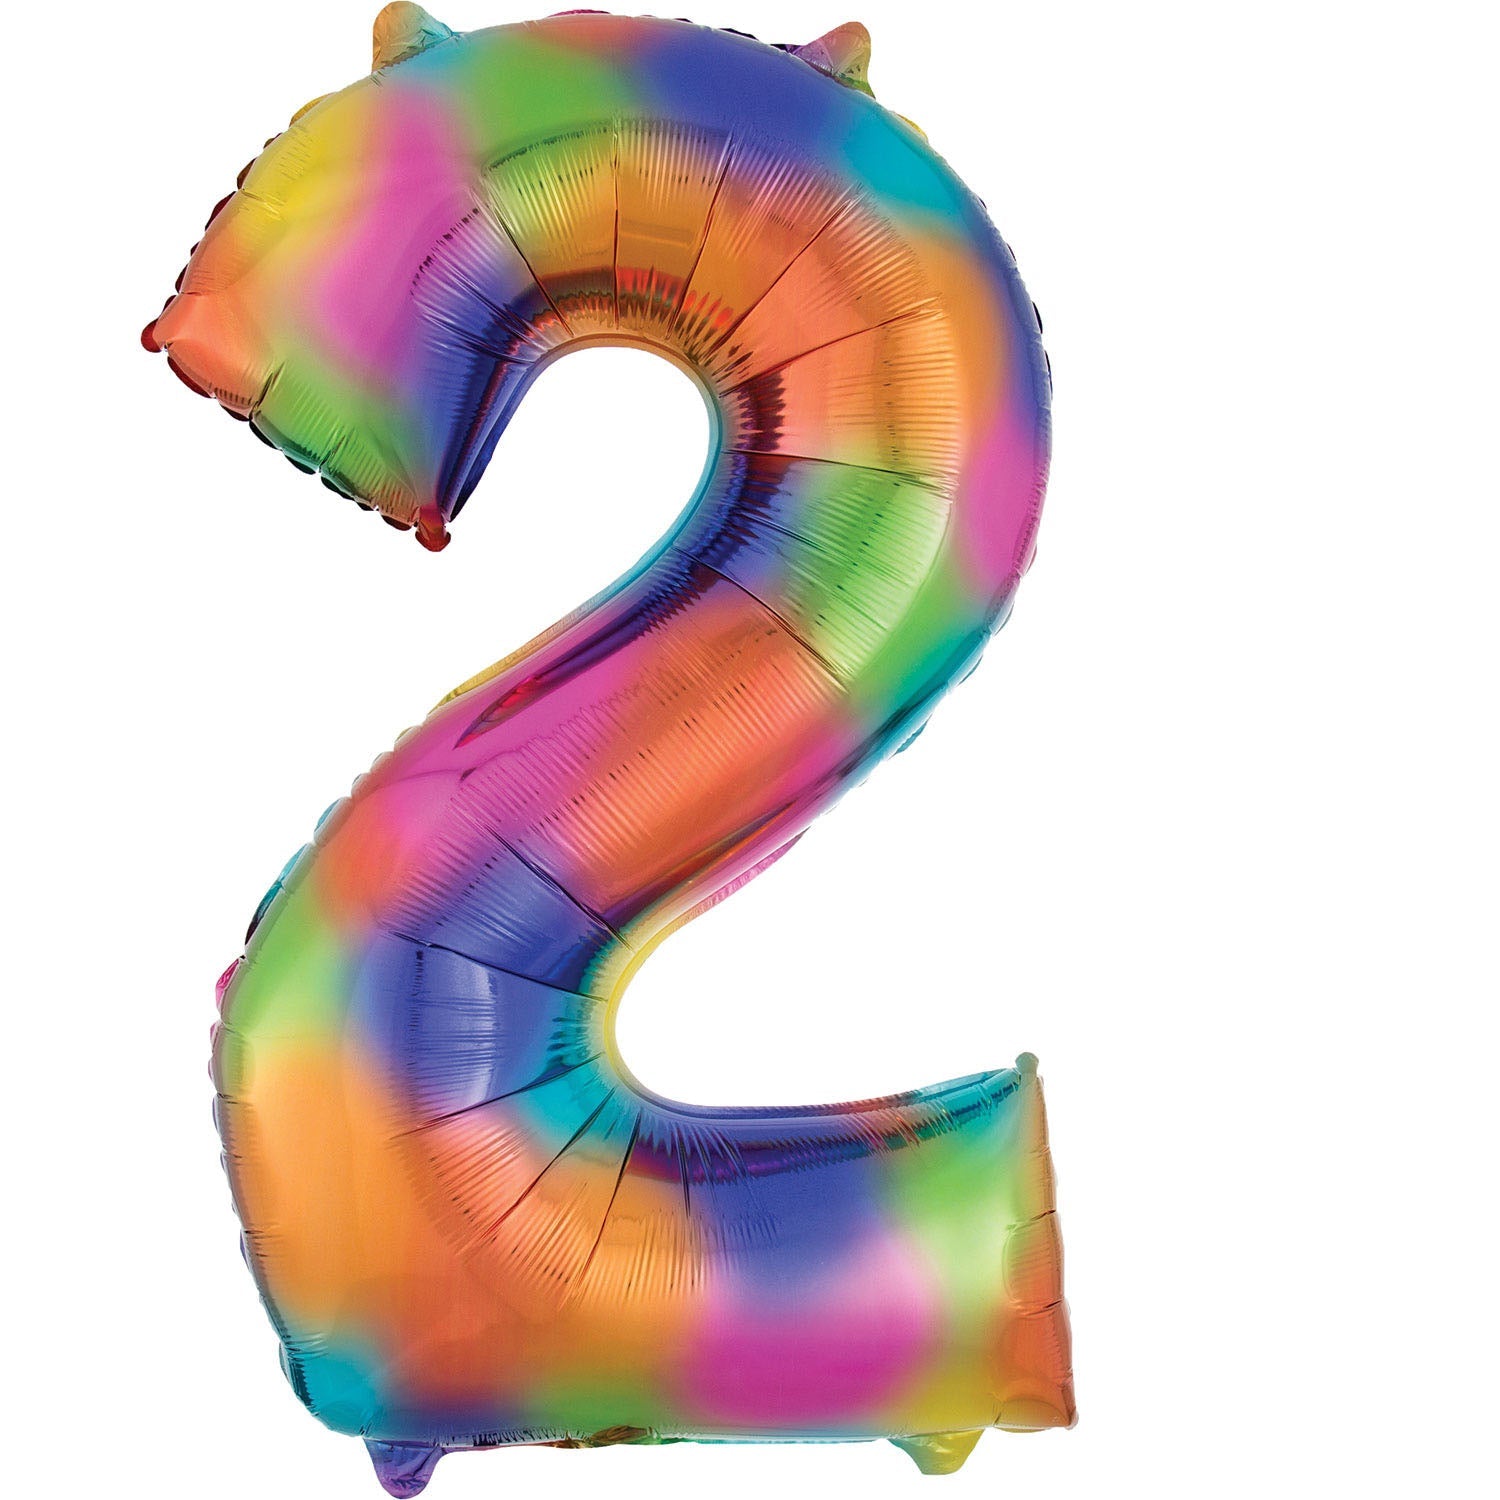 Rainbow Splash Supershape Number 2 Foil Balloon 83cm (33in) height by 55cm (22in) width Balloon is sold uninflated. Can be inflated with air or helium.